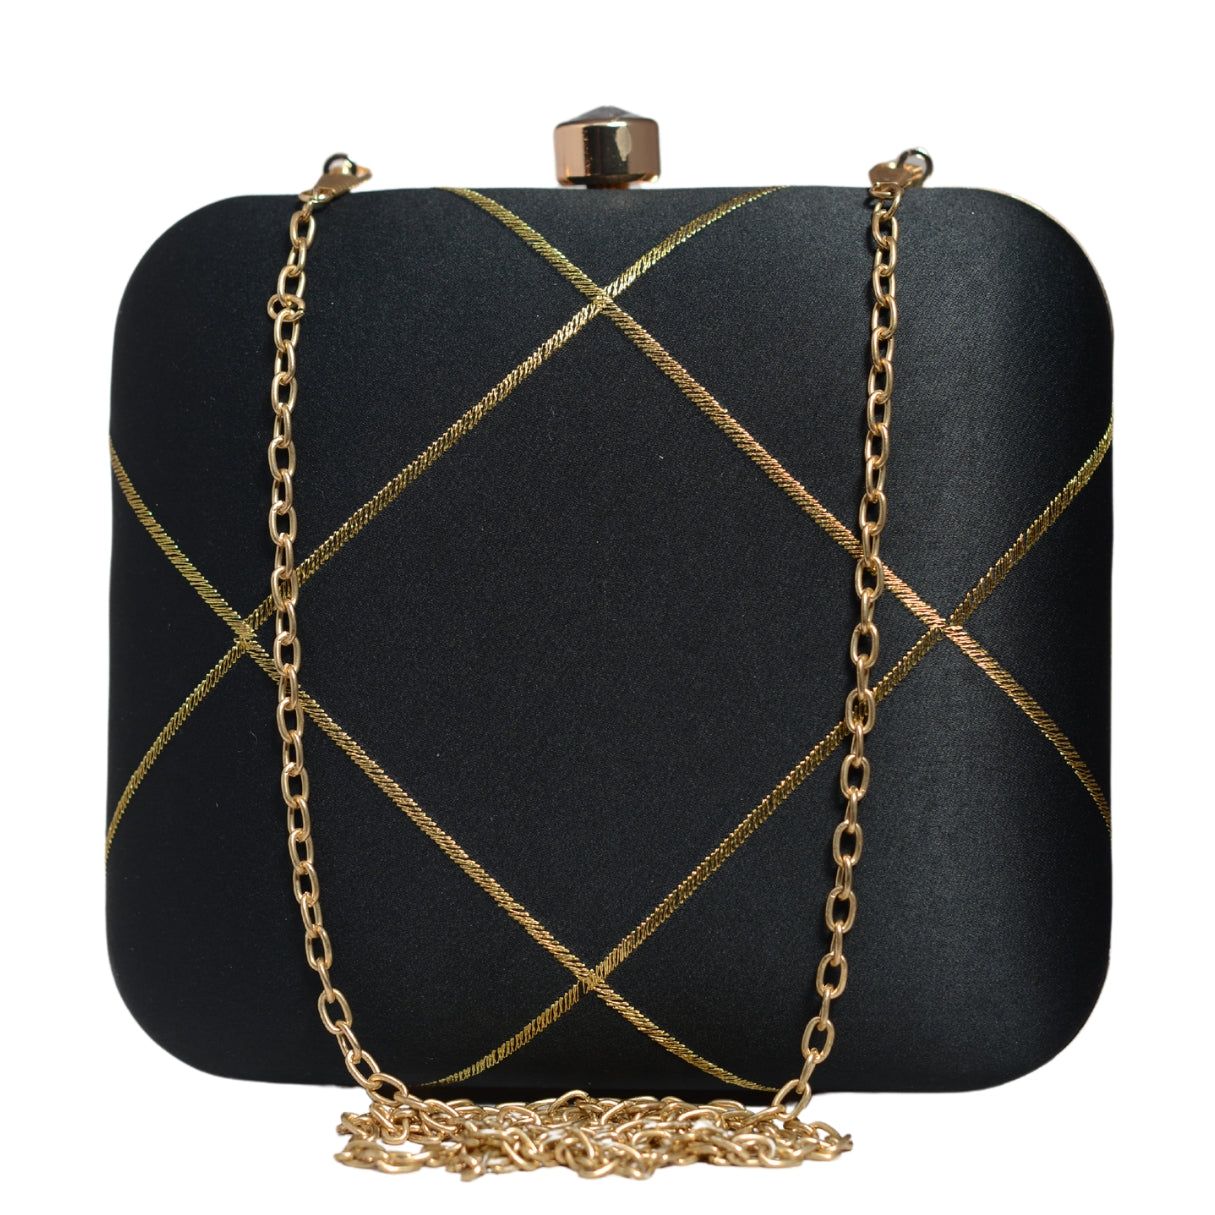 Black And Golden Checks Embroidery Clutch